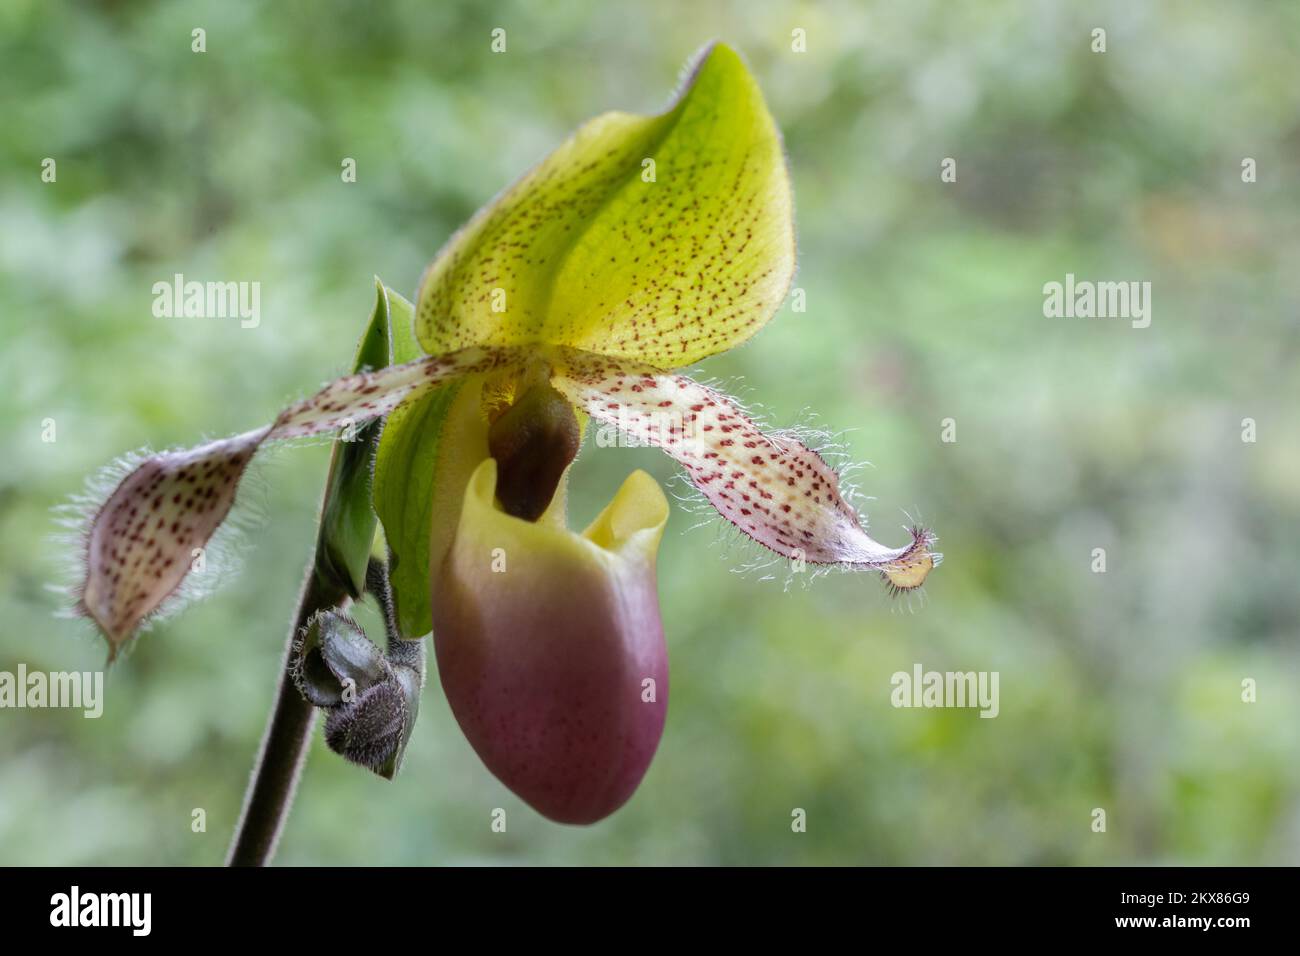 Closeup side view of yellow green and purple pink lady slipper orchid species paphiopedilum moquetteanum flower and bud isolated on natural background Stock Photo